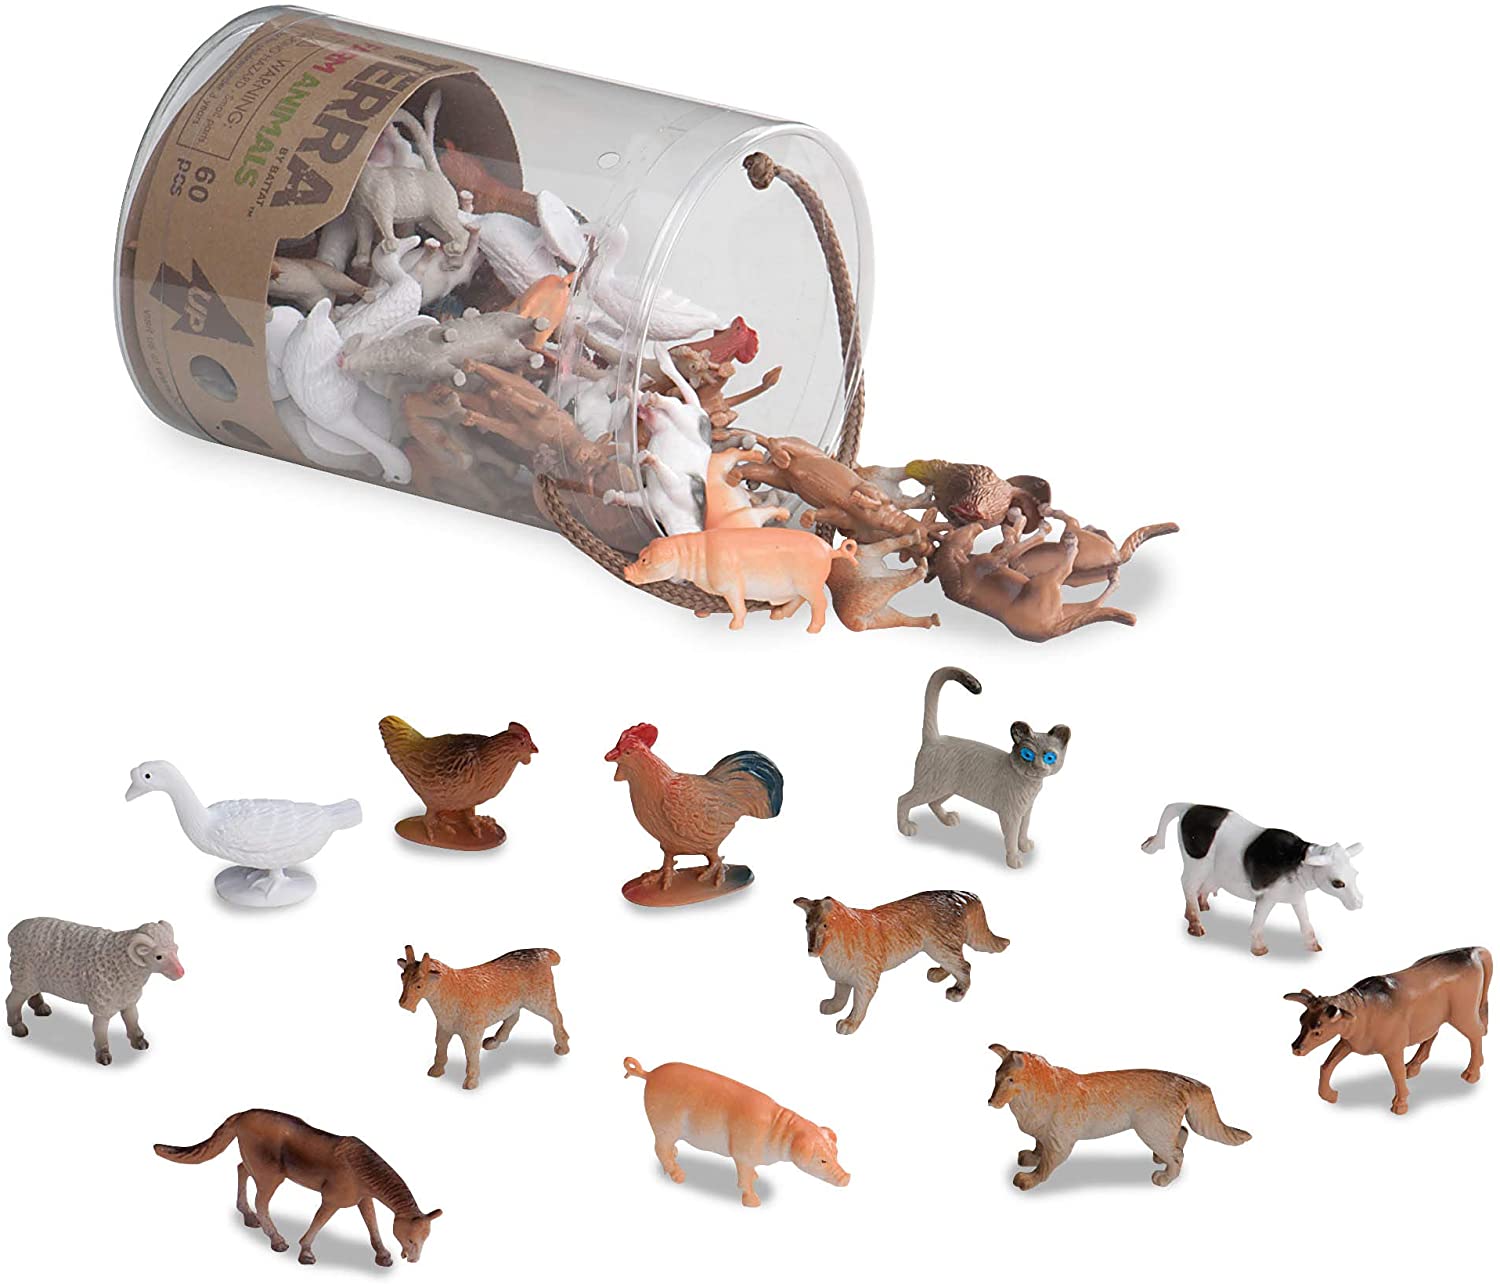 HE1546040 - Terra by Battat Miniature Farm Animals in a Tube - Pack of 60 |  Findel Education